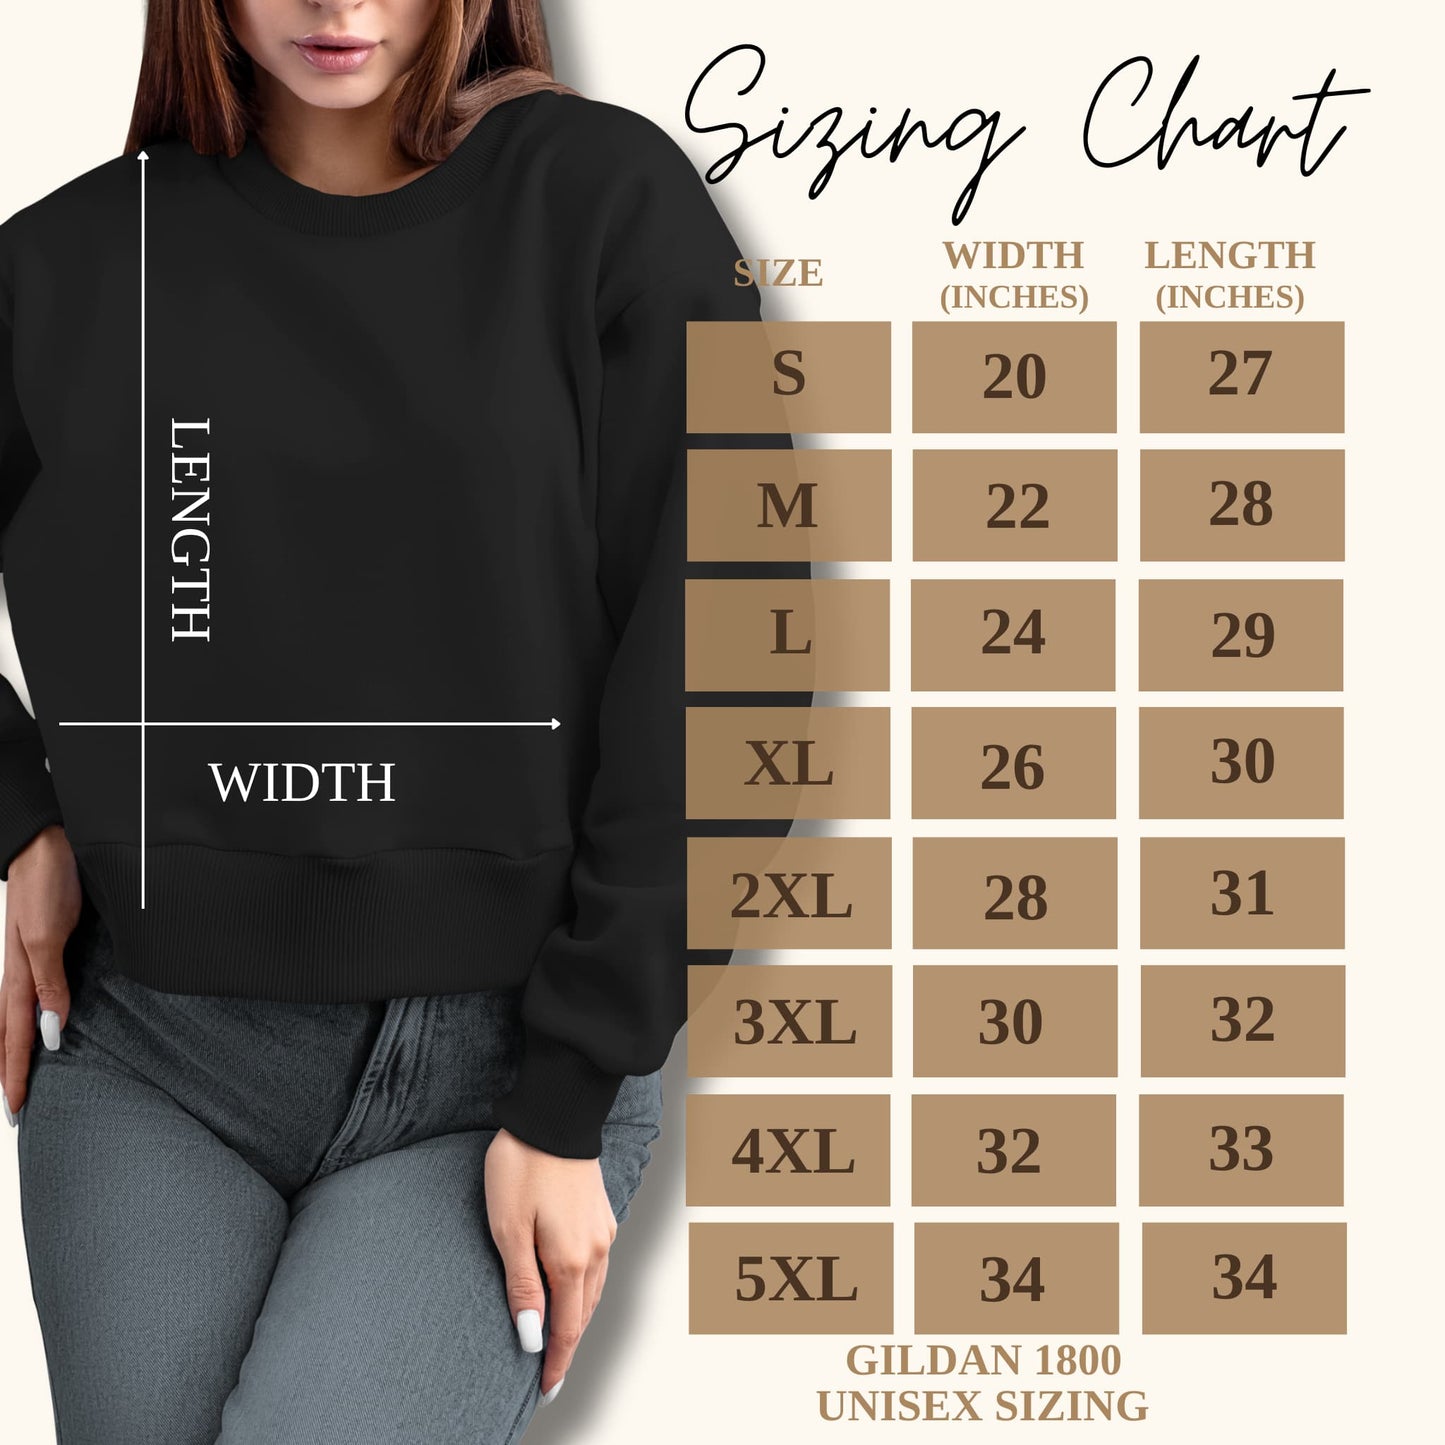 Size guide for the Alaskan Mother Personalized Crewneck Sweatshirt, illustrating available sizes to ensure the perfect fit.